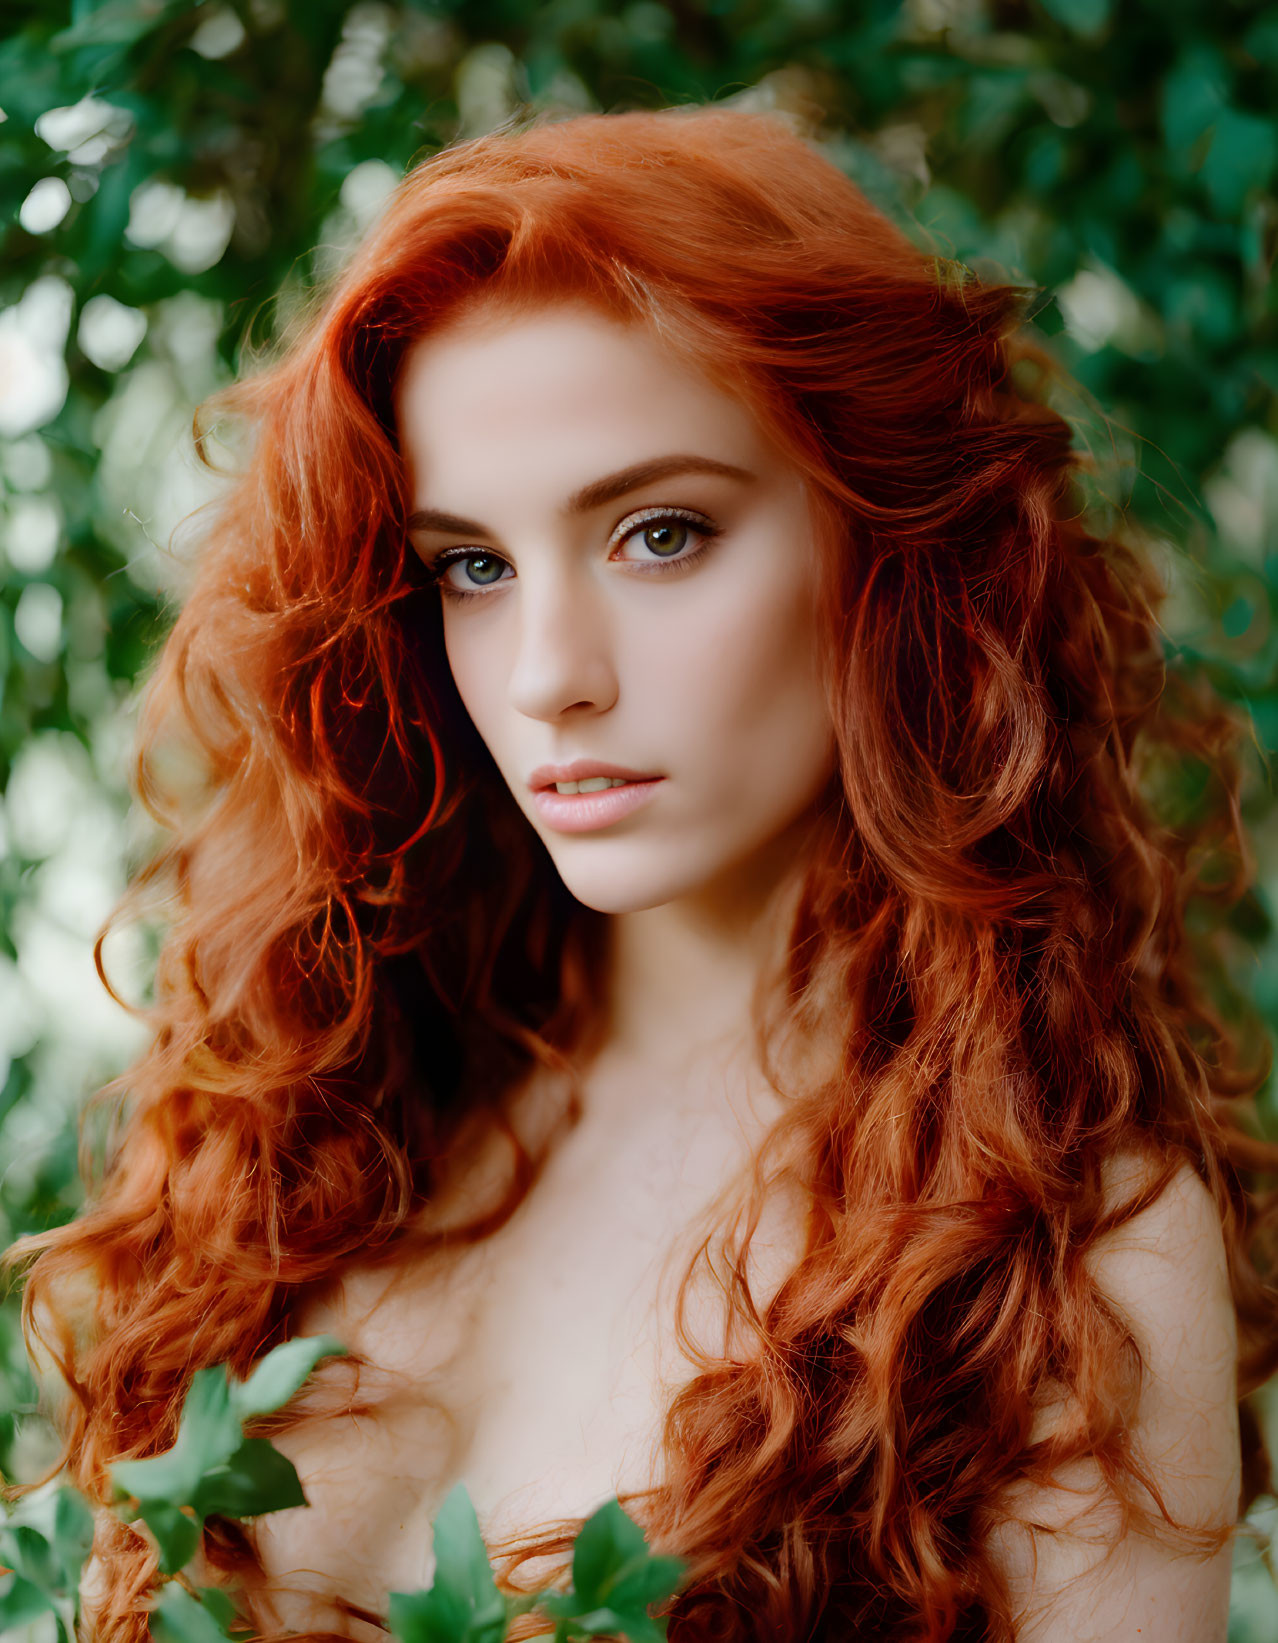 Intense red-haired woman in green foliage gaze.